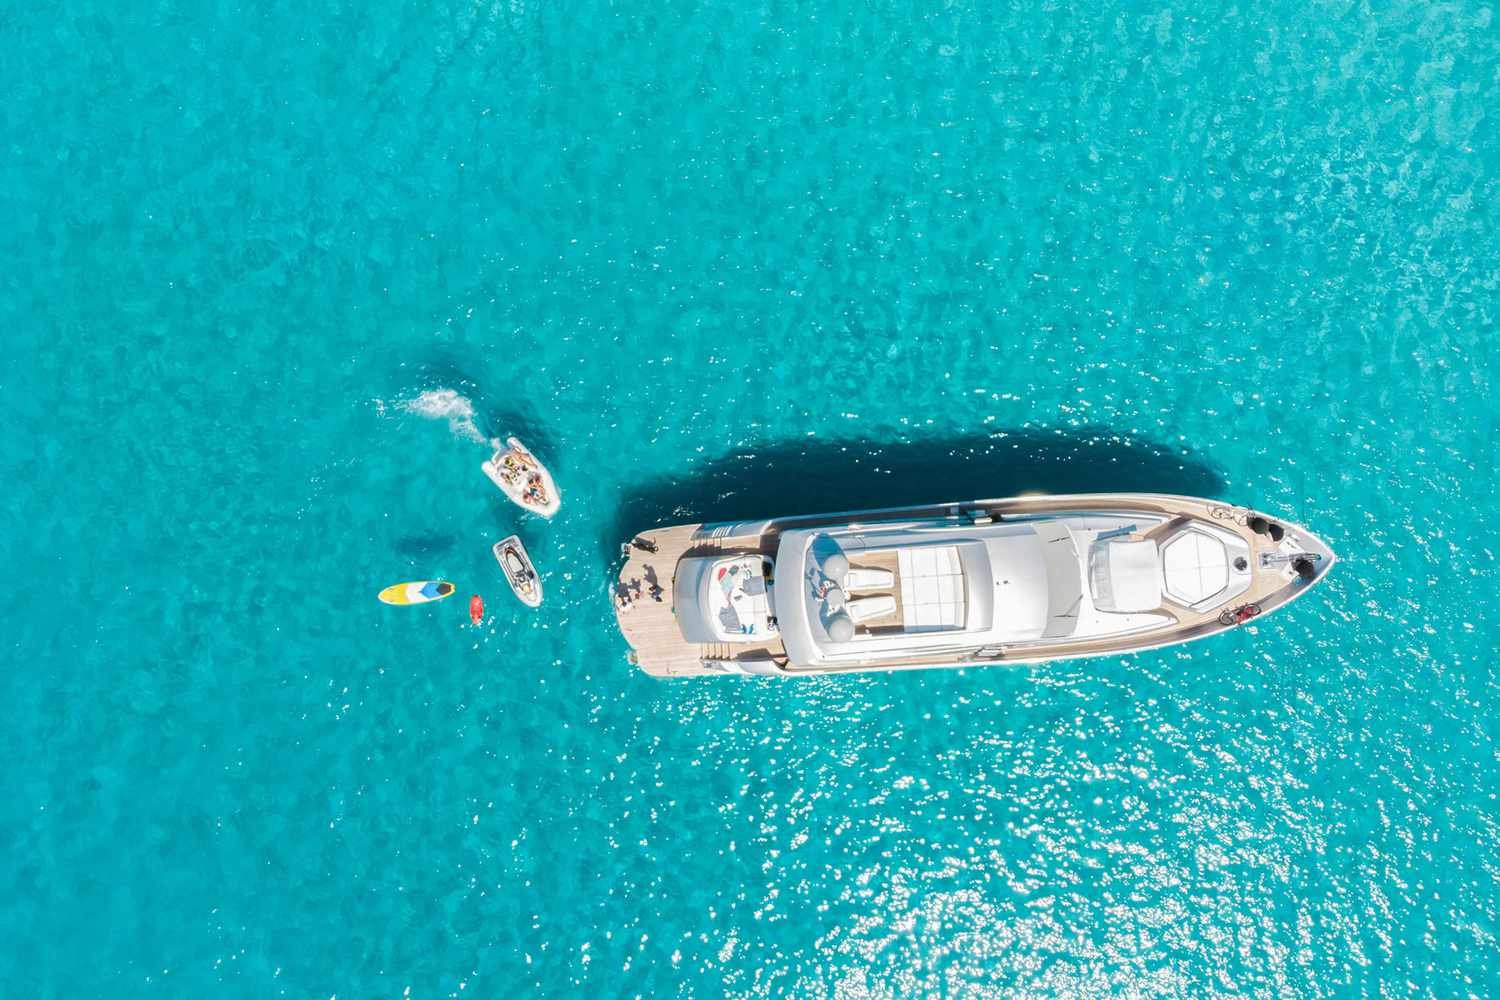 The 5 Biggest Mistakes to Avoid When Booking a Yacht Trip, According to an Expert